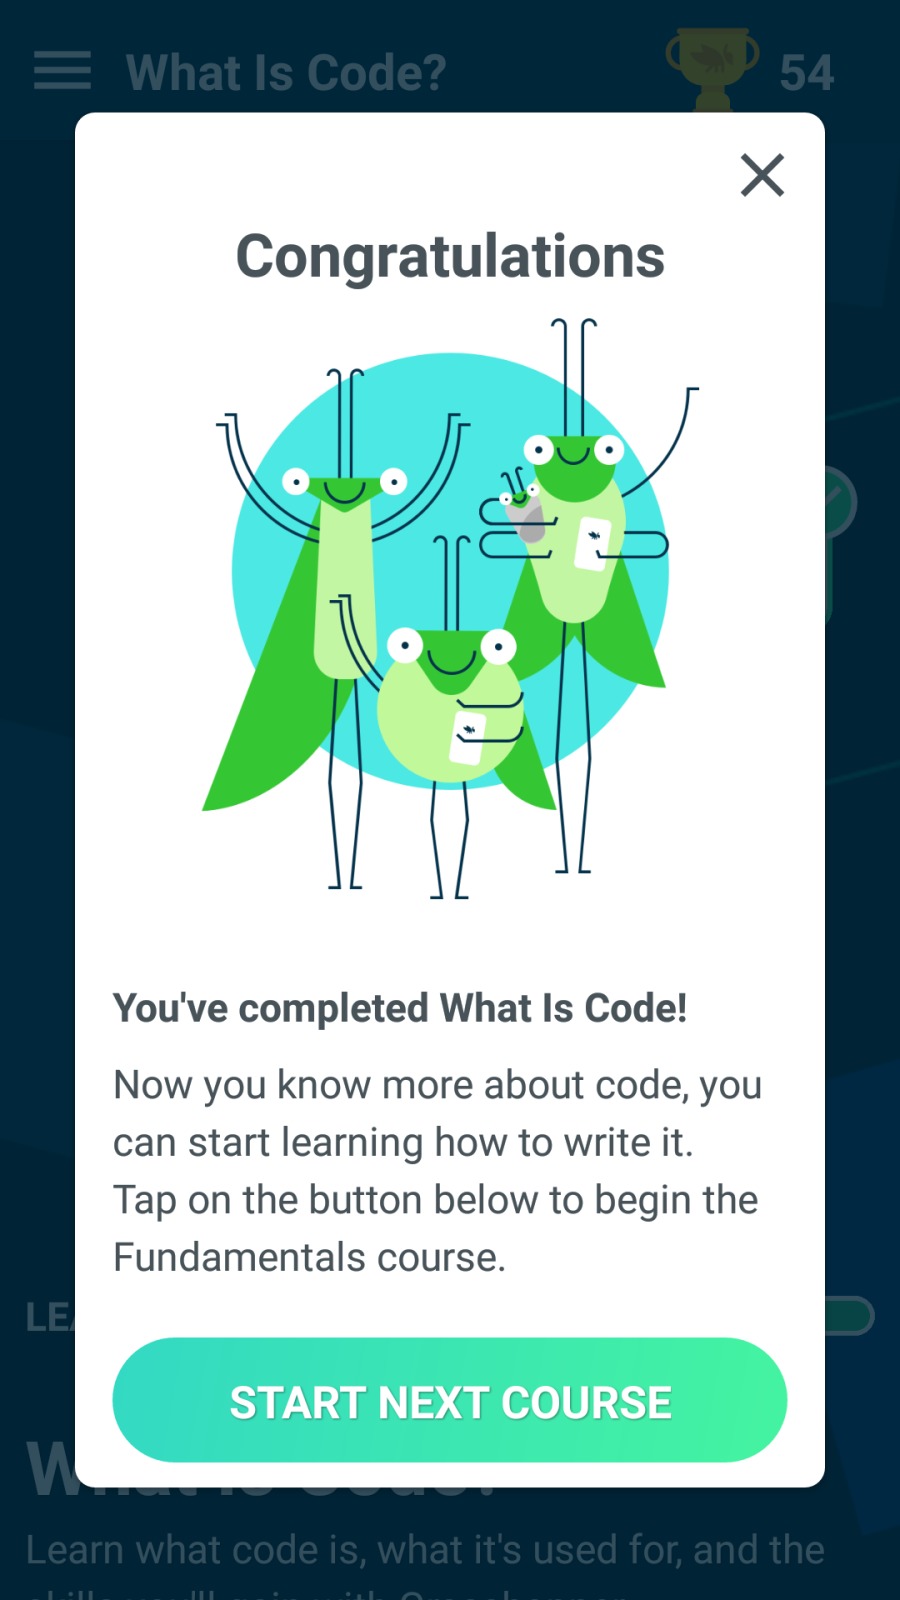 X

Congratulations

You've completed What Is Code!

Now you know more about code, you
can start learning how to write it.
Tap on the button below to begin the
Fundamentals course.